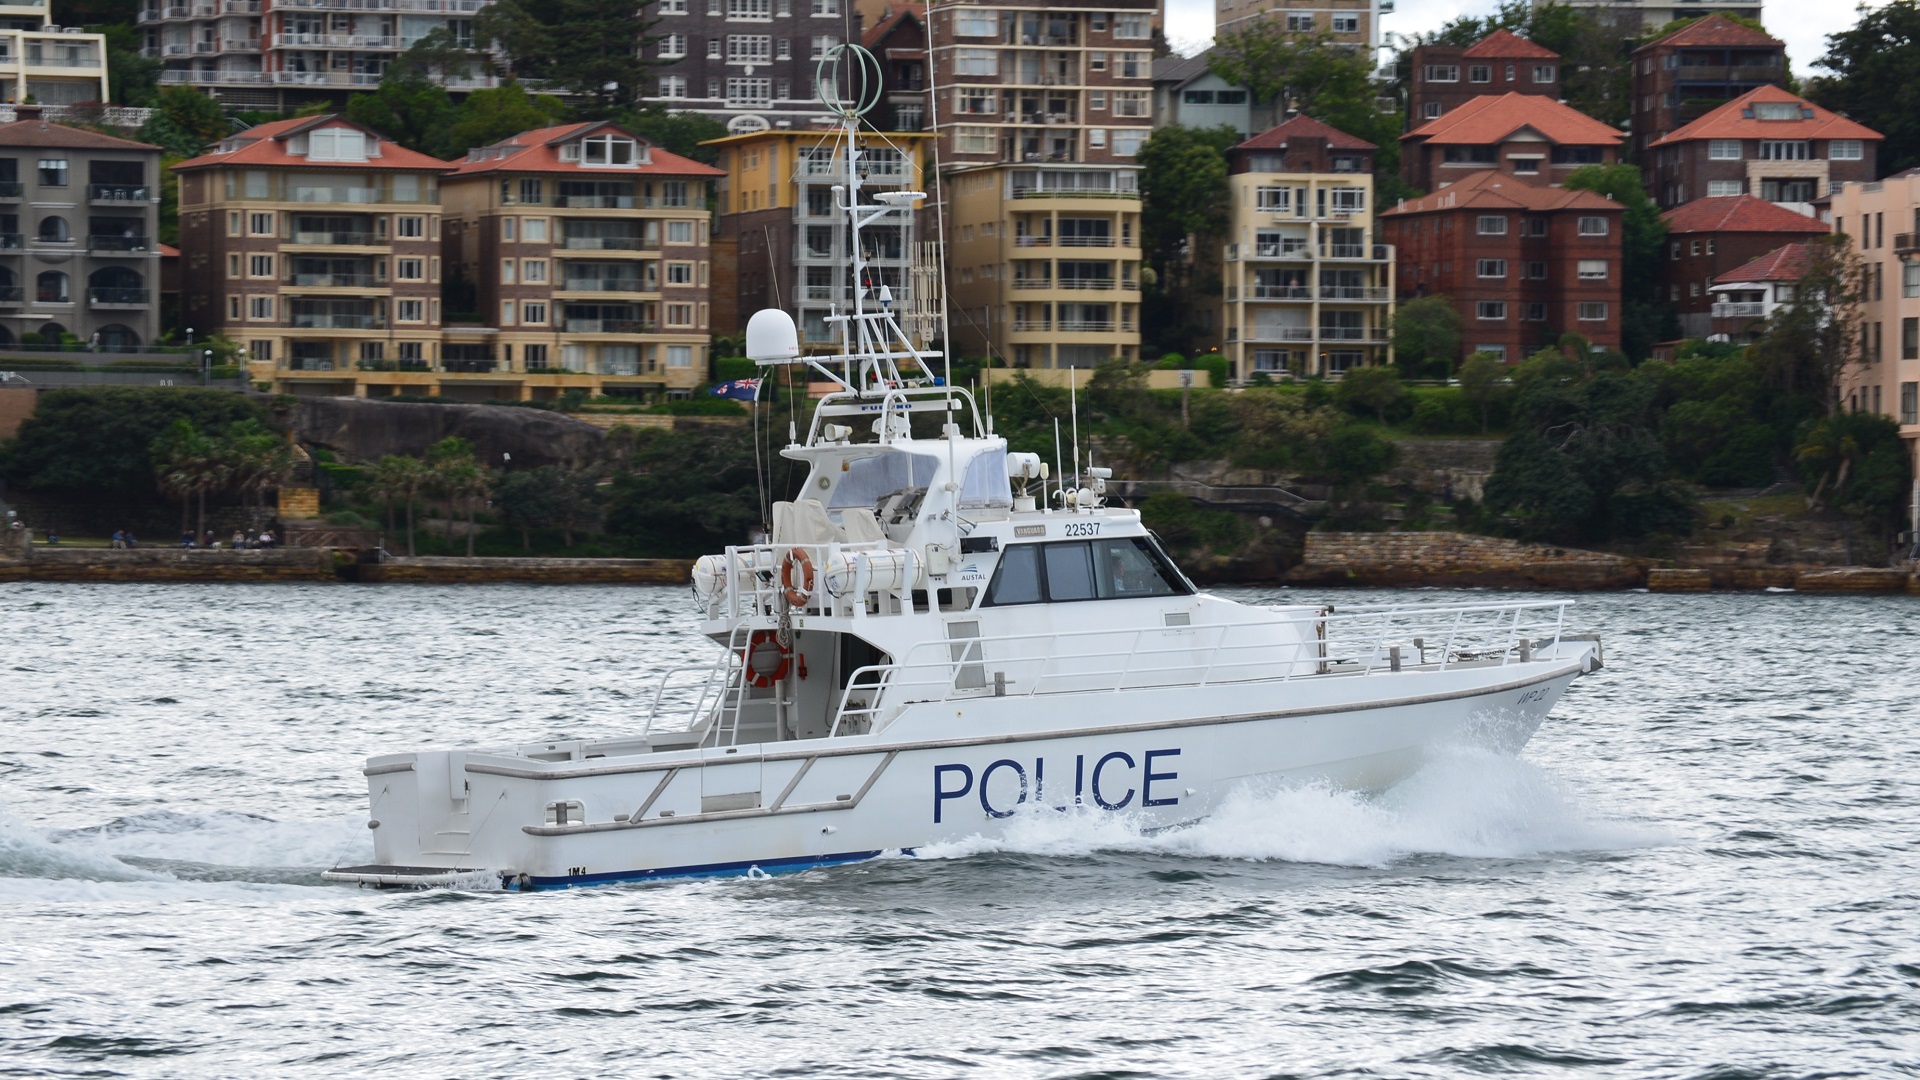 vehicles, nsw water police, boat, maritime, police